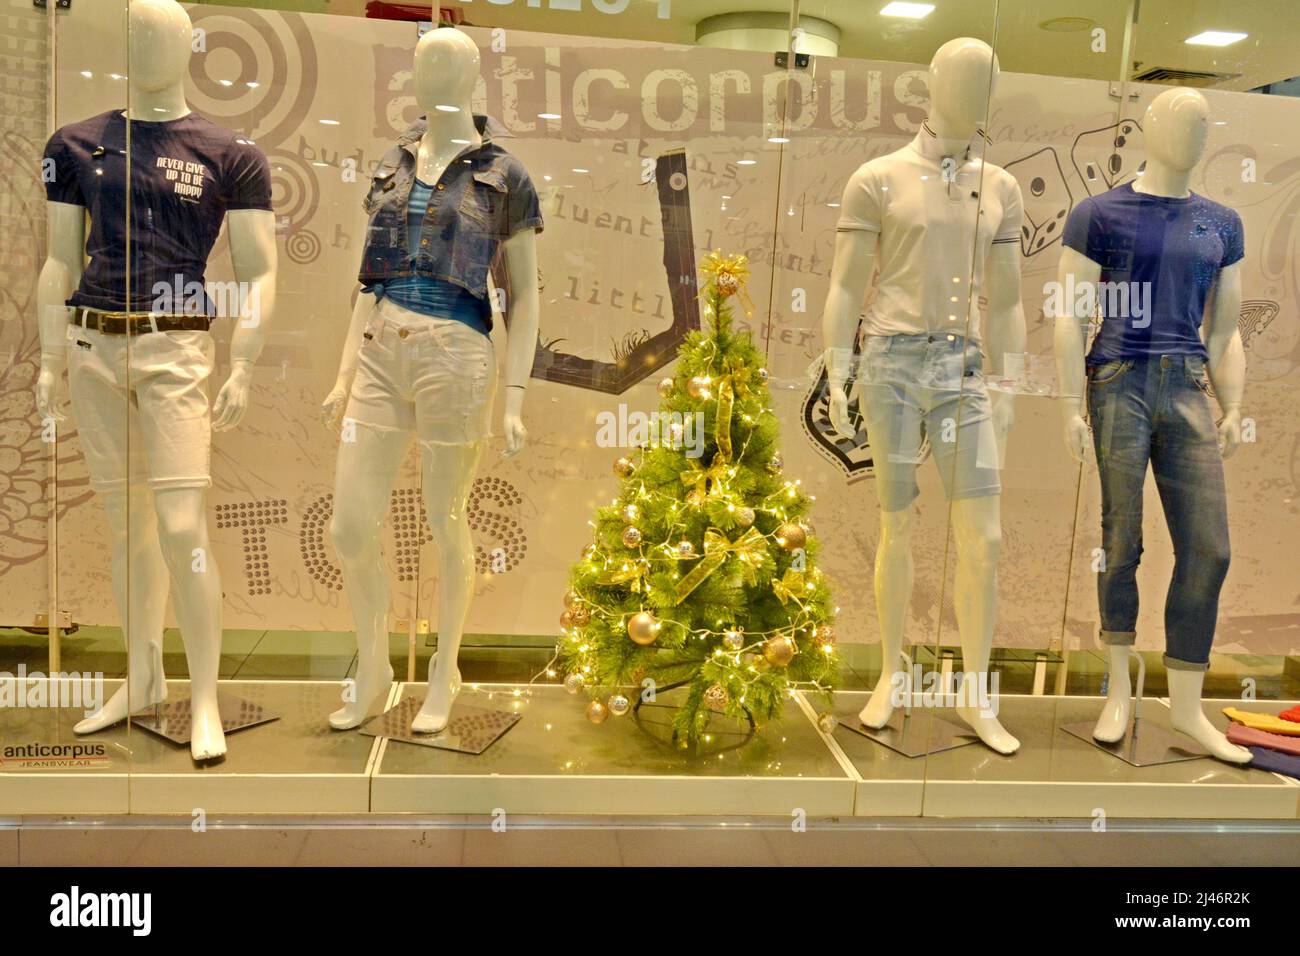 Illuminated window of the Anticorpus store in a shopping center in Brazil, South America, Shop window, Facade of a store in the mall in Brasil, South Stock Photo